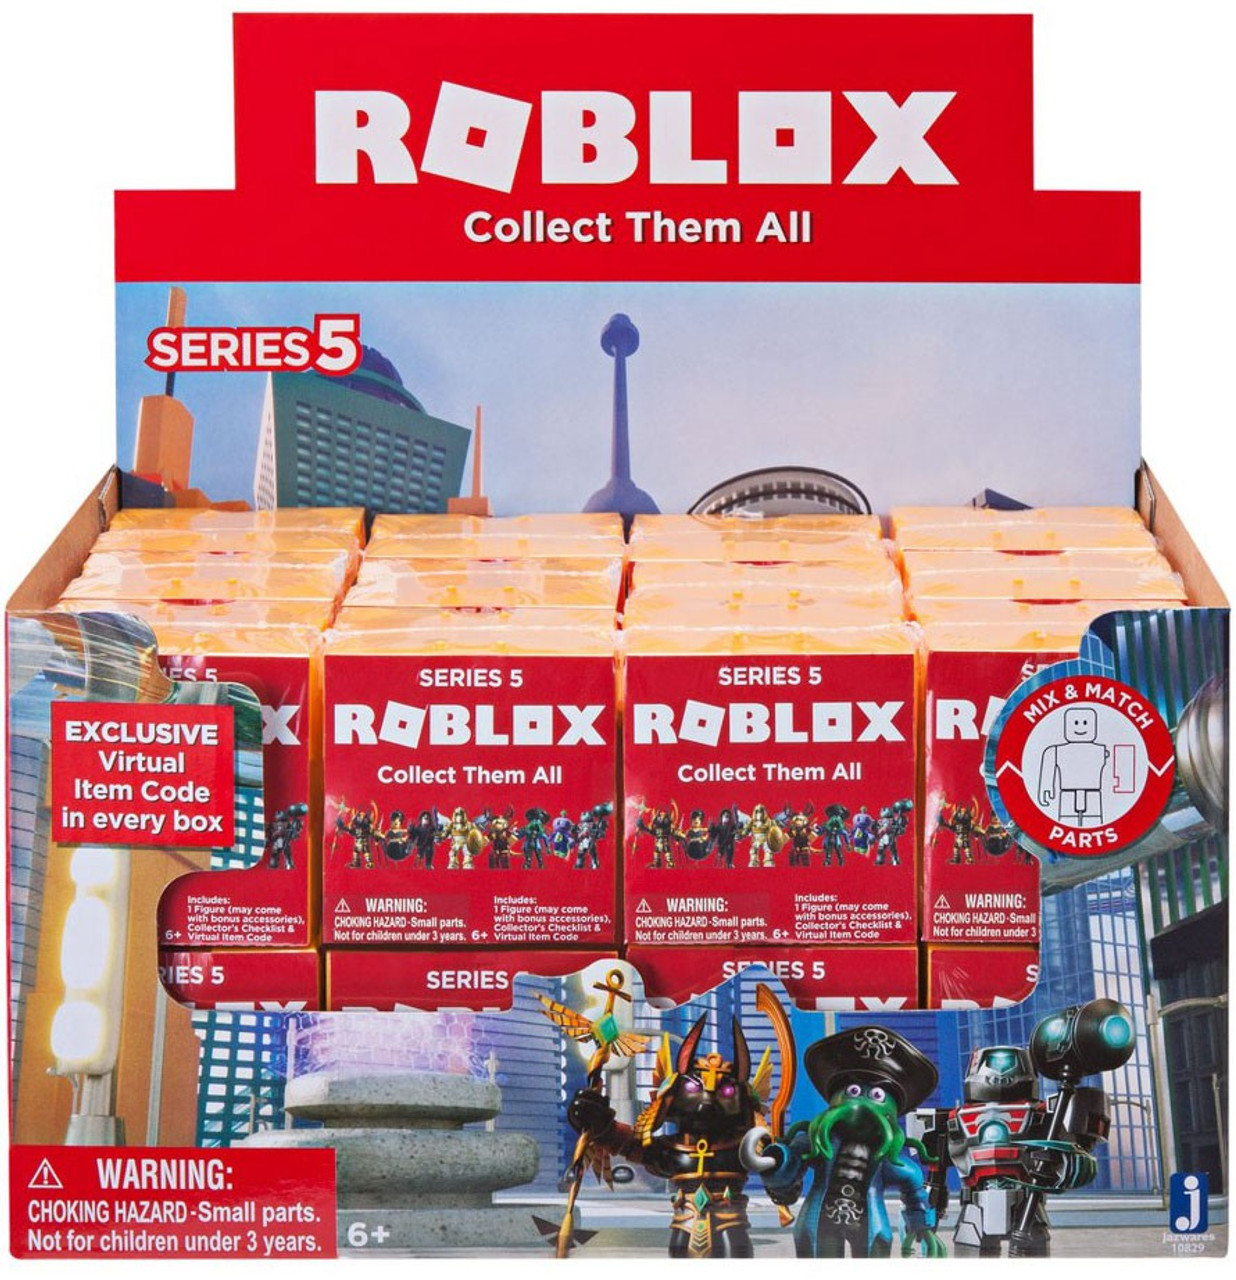 Roblox Series 5 Yellow Gold Blind Box Toys Figures1 2 3 4 - roblox blind bags series 3 products in 2019 action